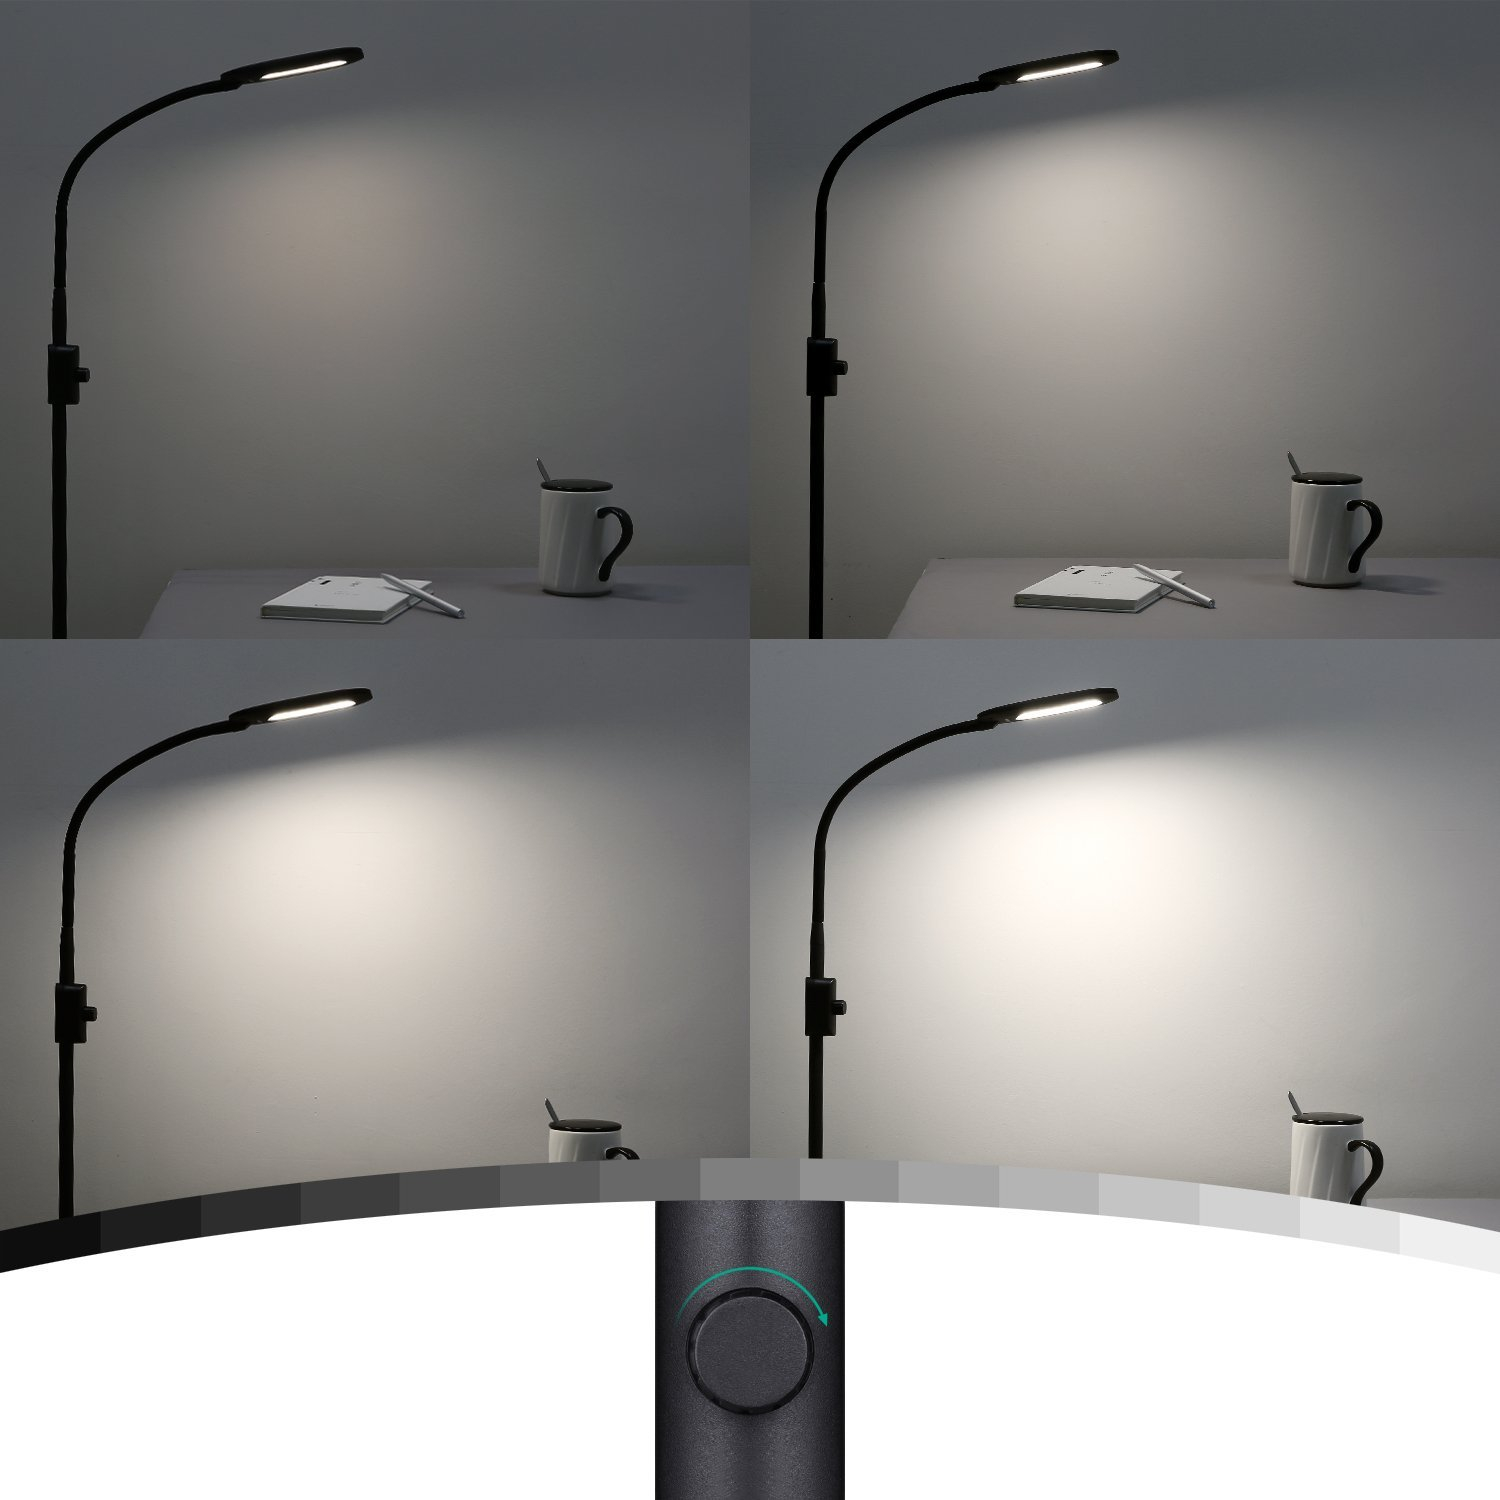 Aukey Lt St34 Review Led Floor Lamp 65w Led pertaining to dimensions 1500 X 1500